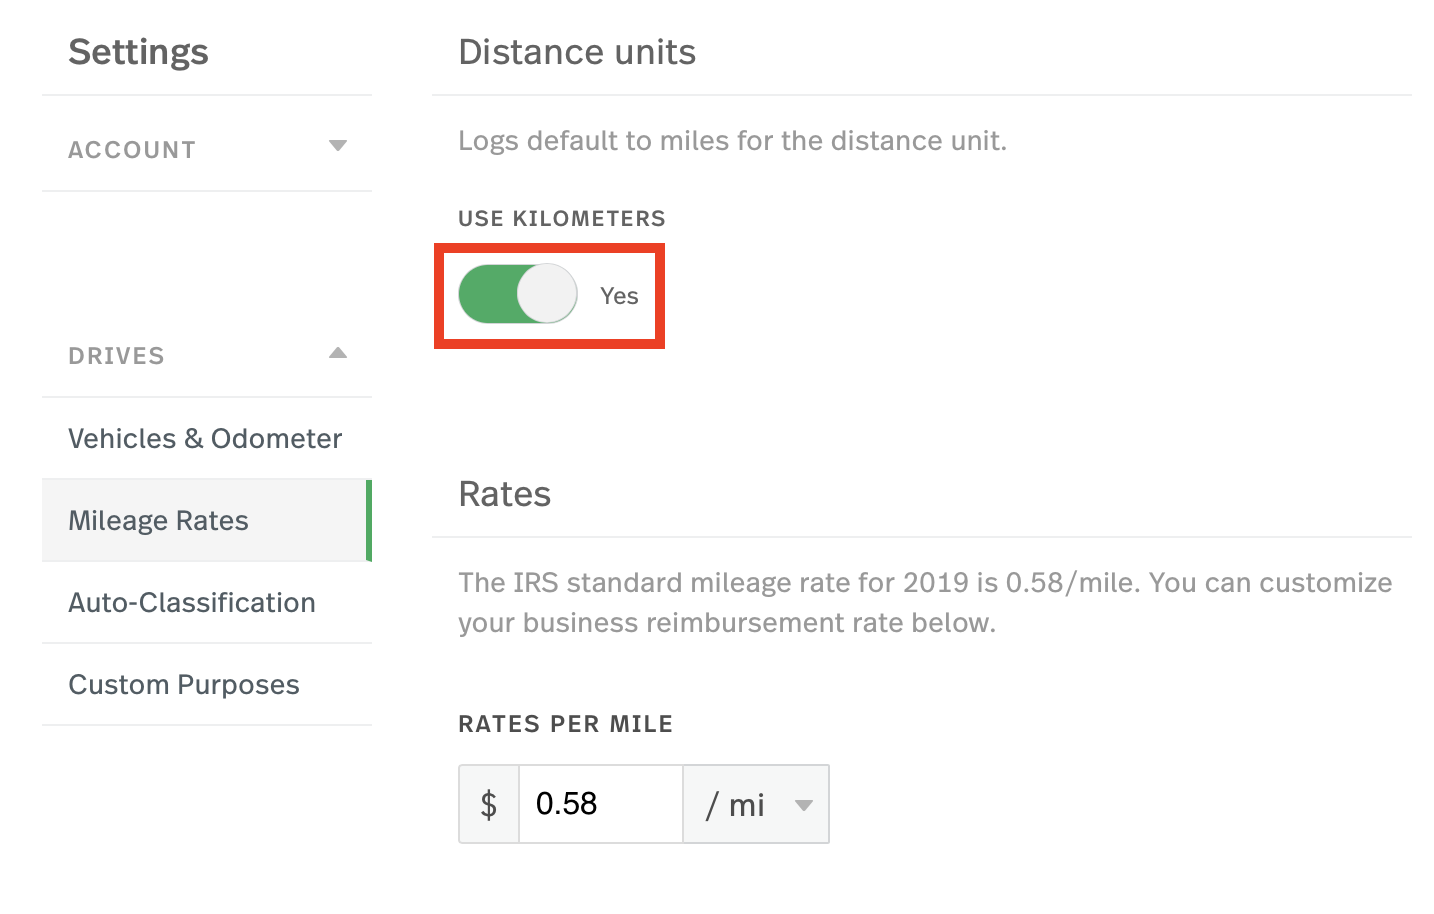 This is a screenshot of the Mileage Rates page with the distance unit toggle highlighted to Yes for Kilometers.